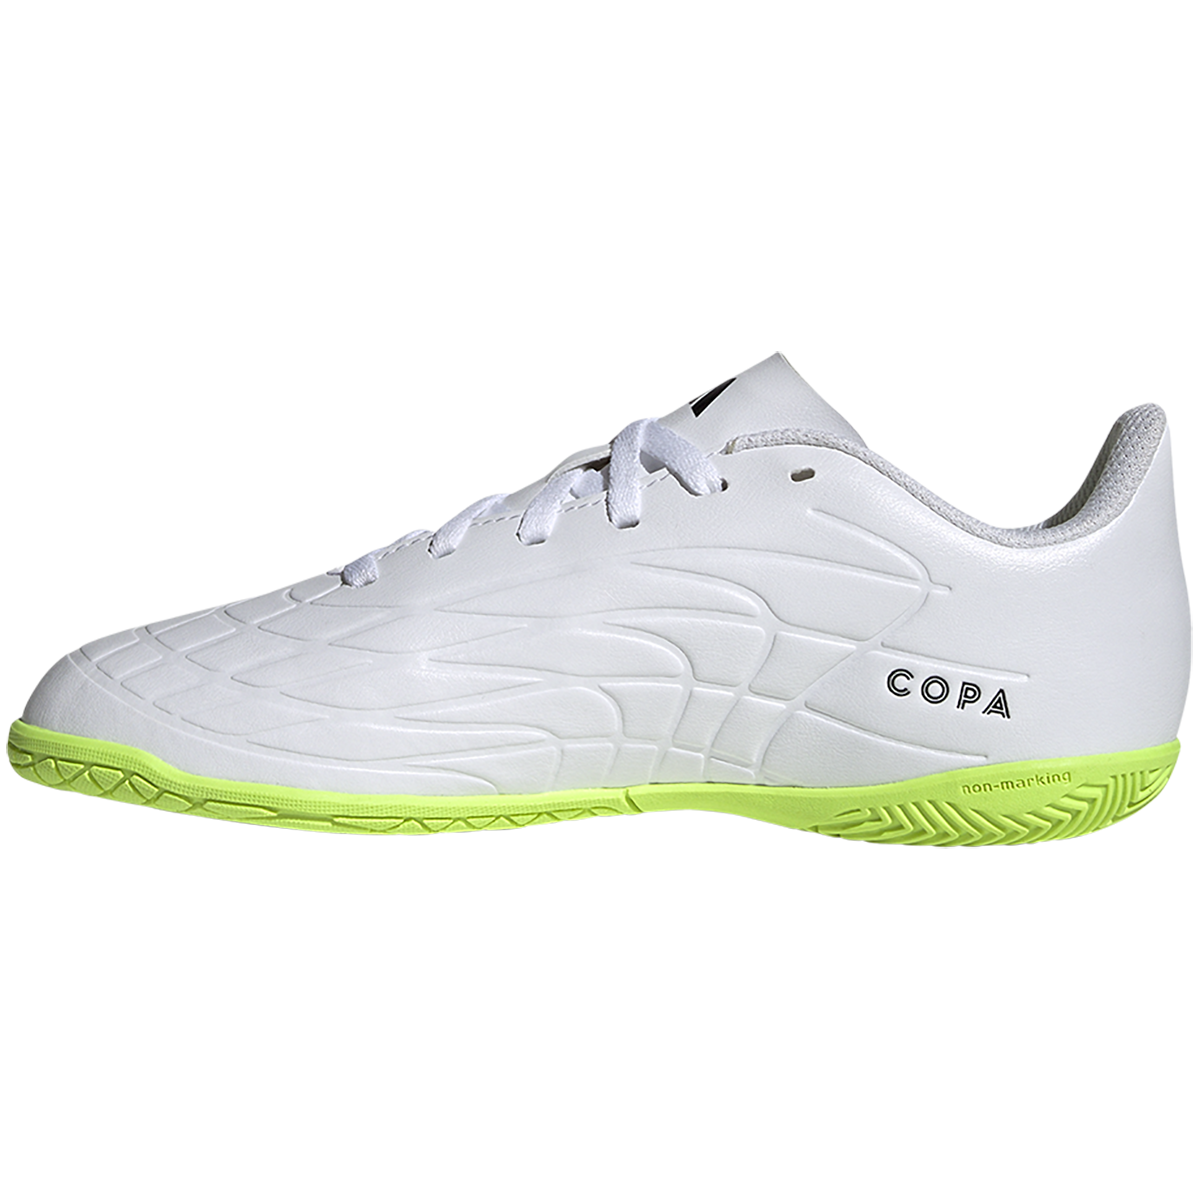 Youth Copa Pure.4 Indoor alternate view